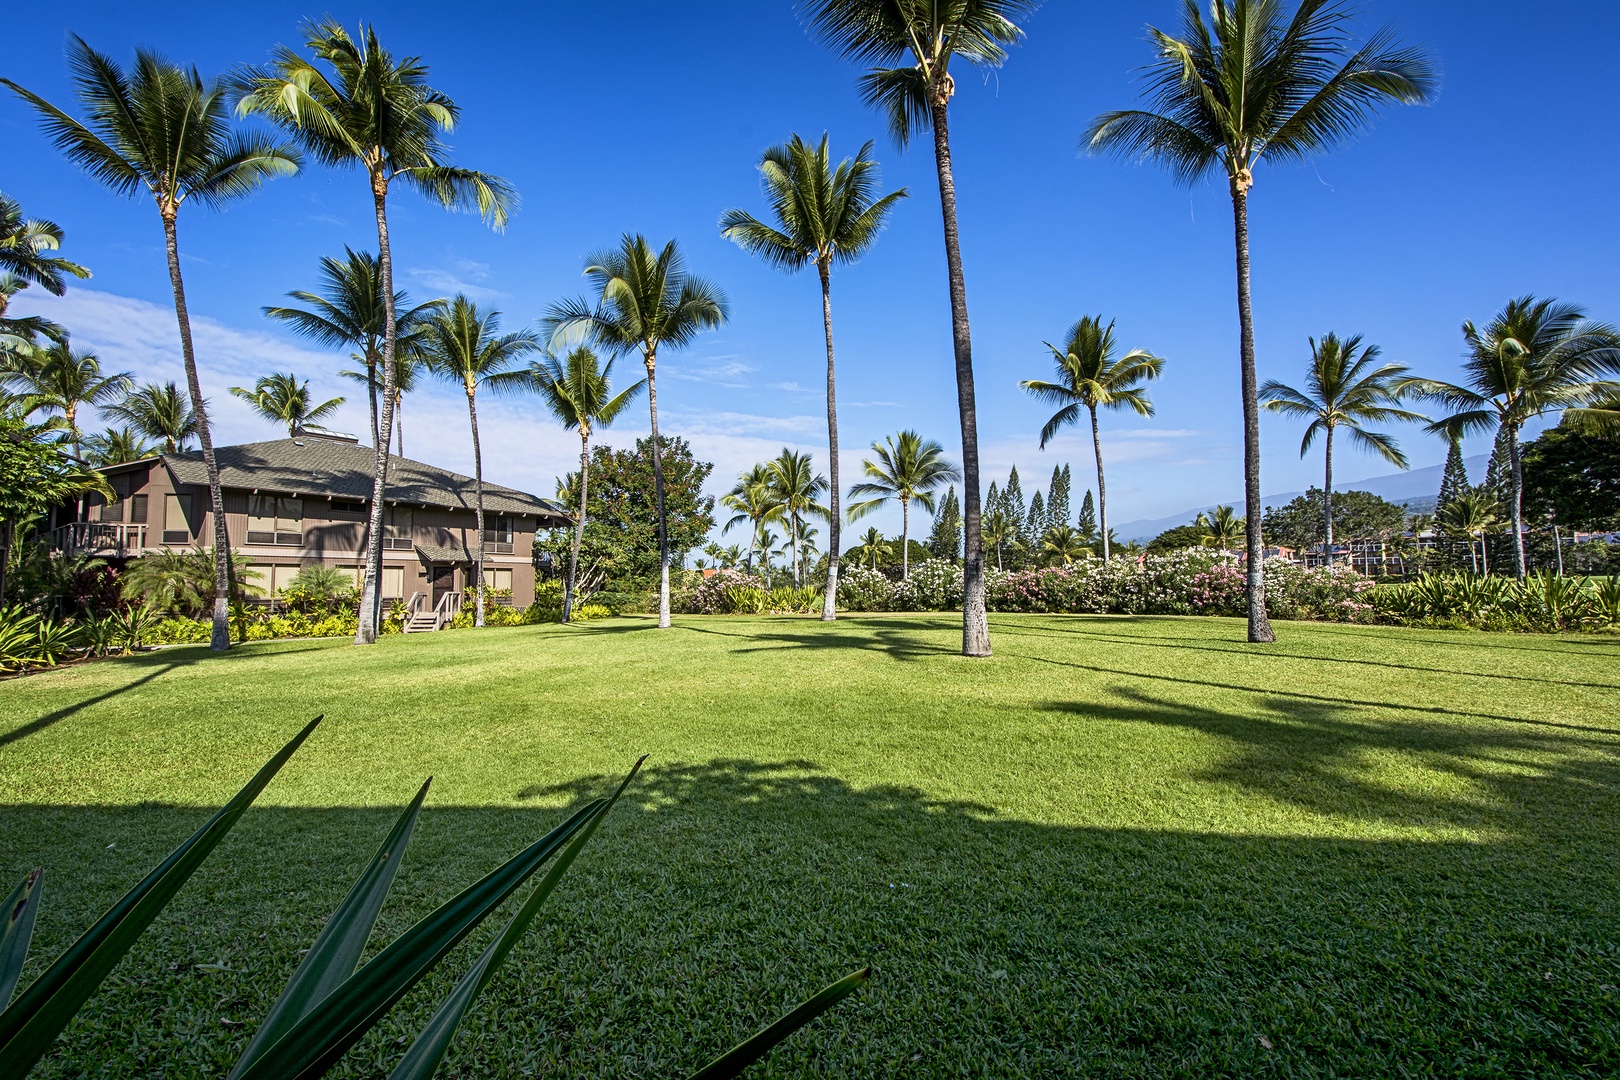 Kailua Kona Vacation Rentals, Kanaloa at Kona 701 - Visit the famous farmers market. Enjoy a shave ice or a cup of Kona coffee. Dine on a light snack or a gourmet meal, buy an inexpensive souvenir or a piece of fine art, book an activity, go for a swim or hang out at the beach.